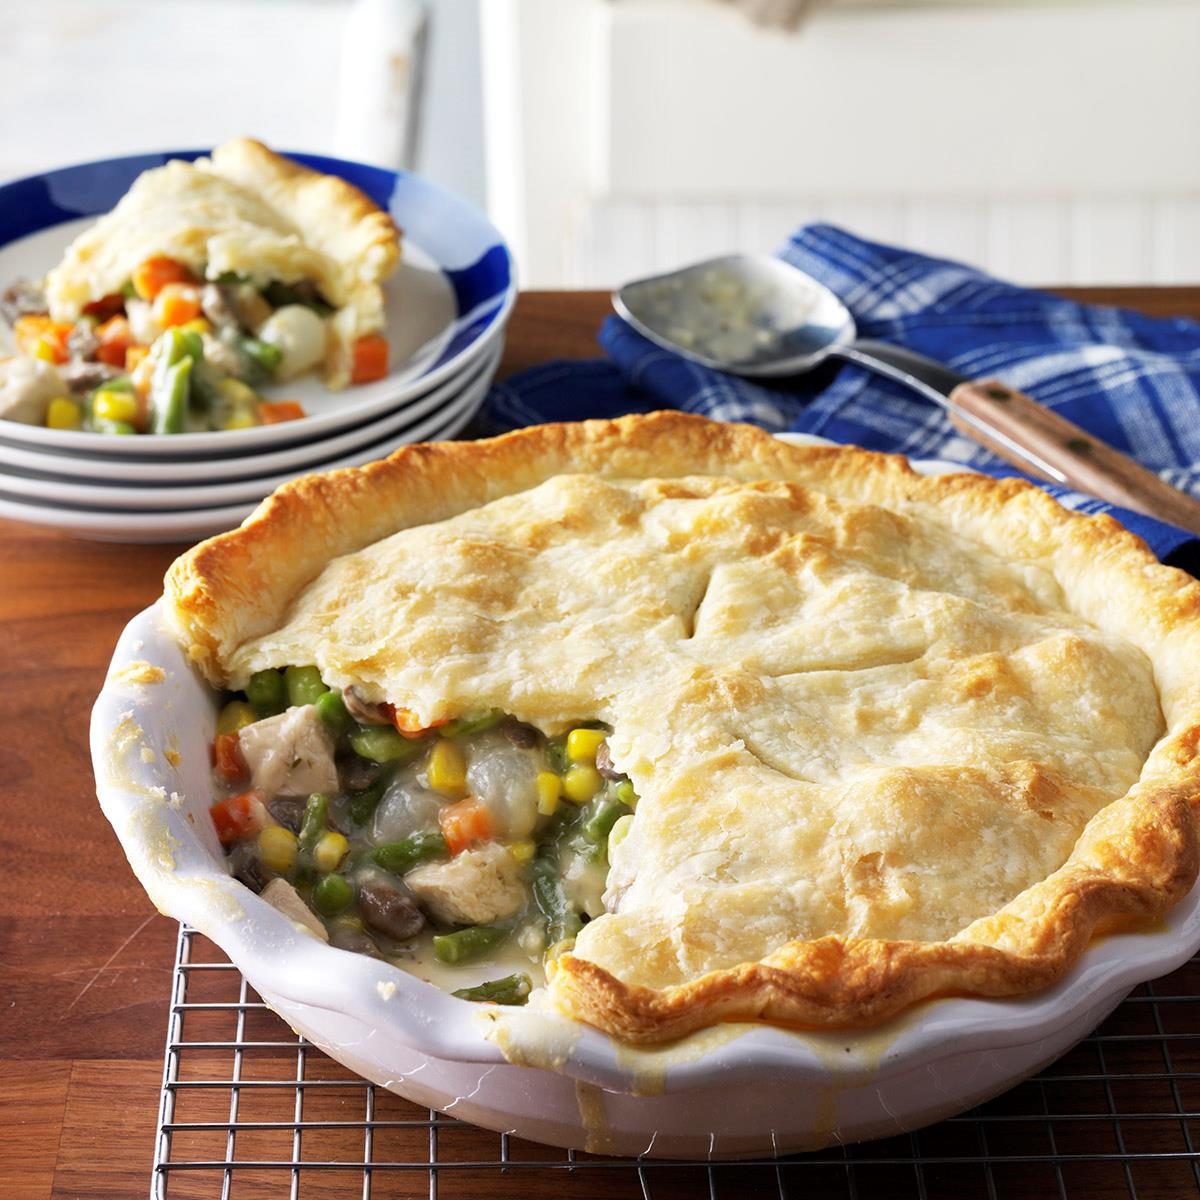 Inspired by Michael's Lunchtime Chicken Potpie